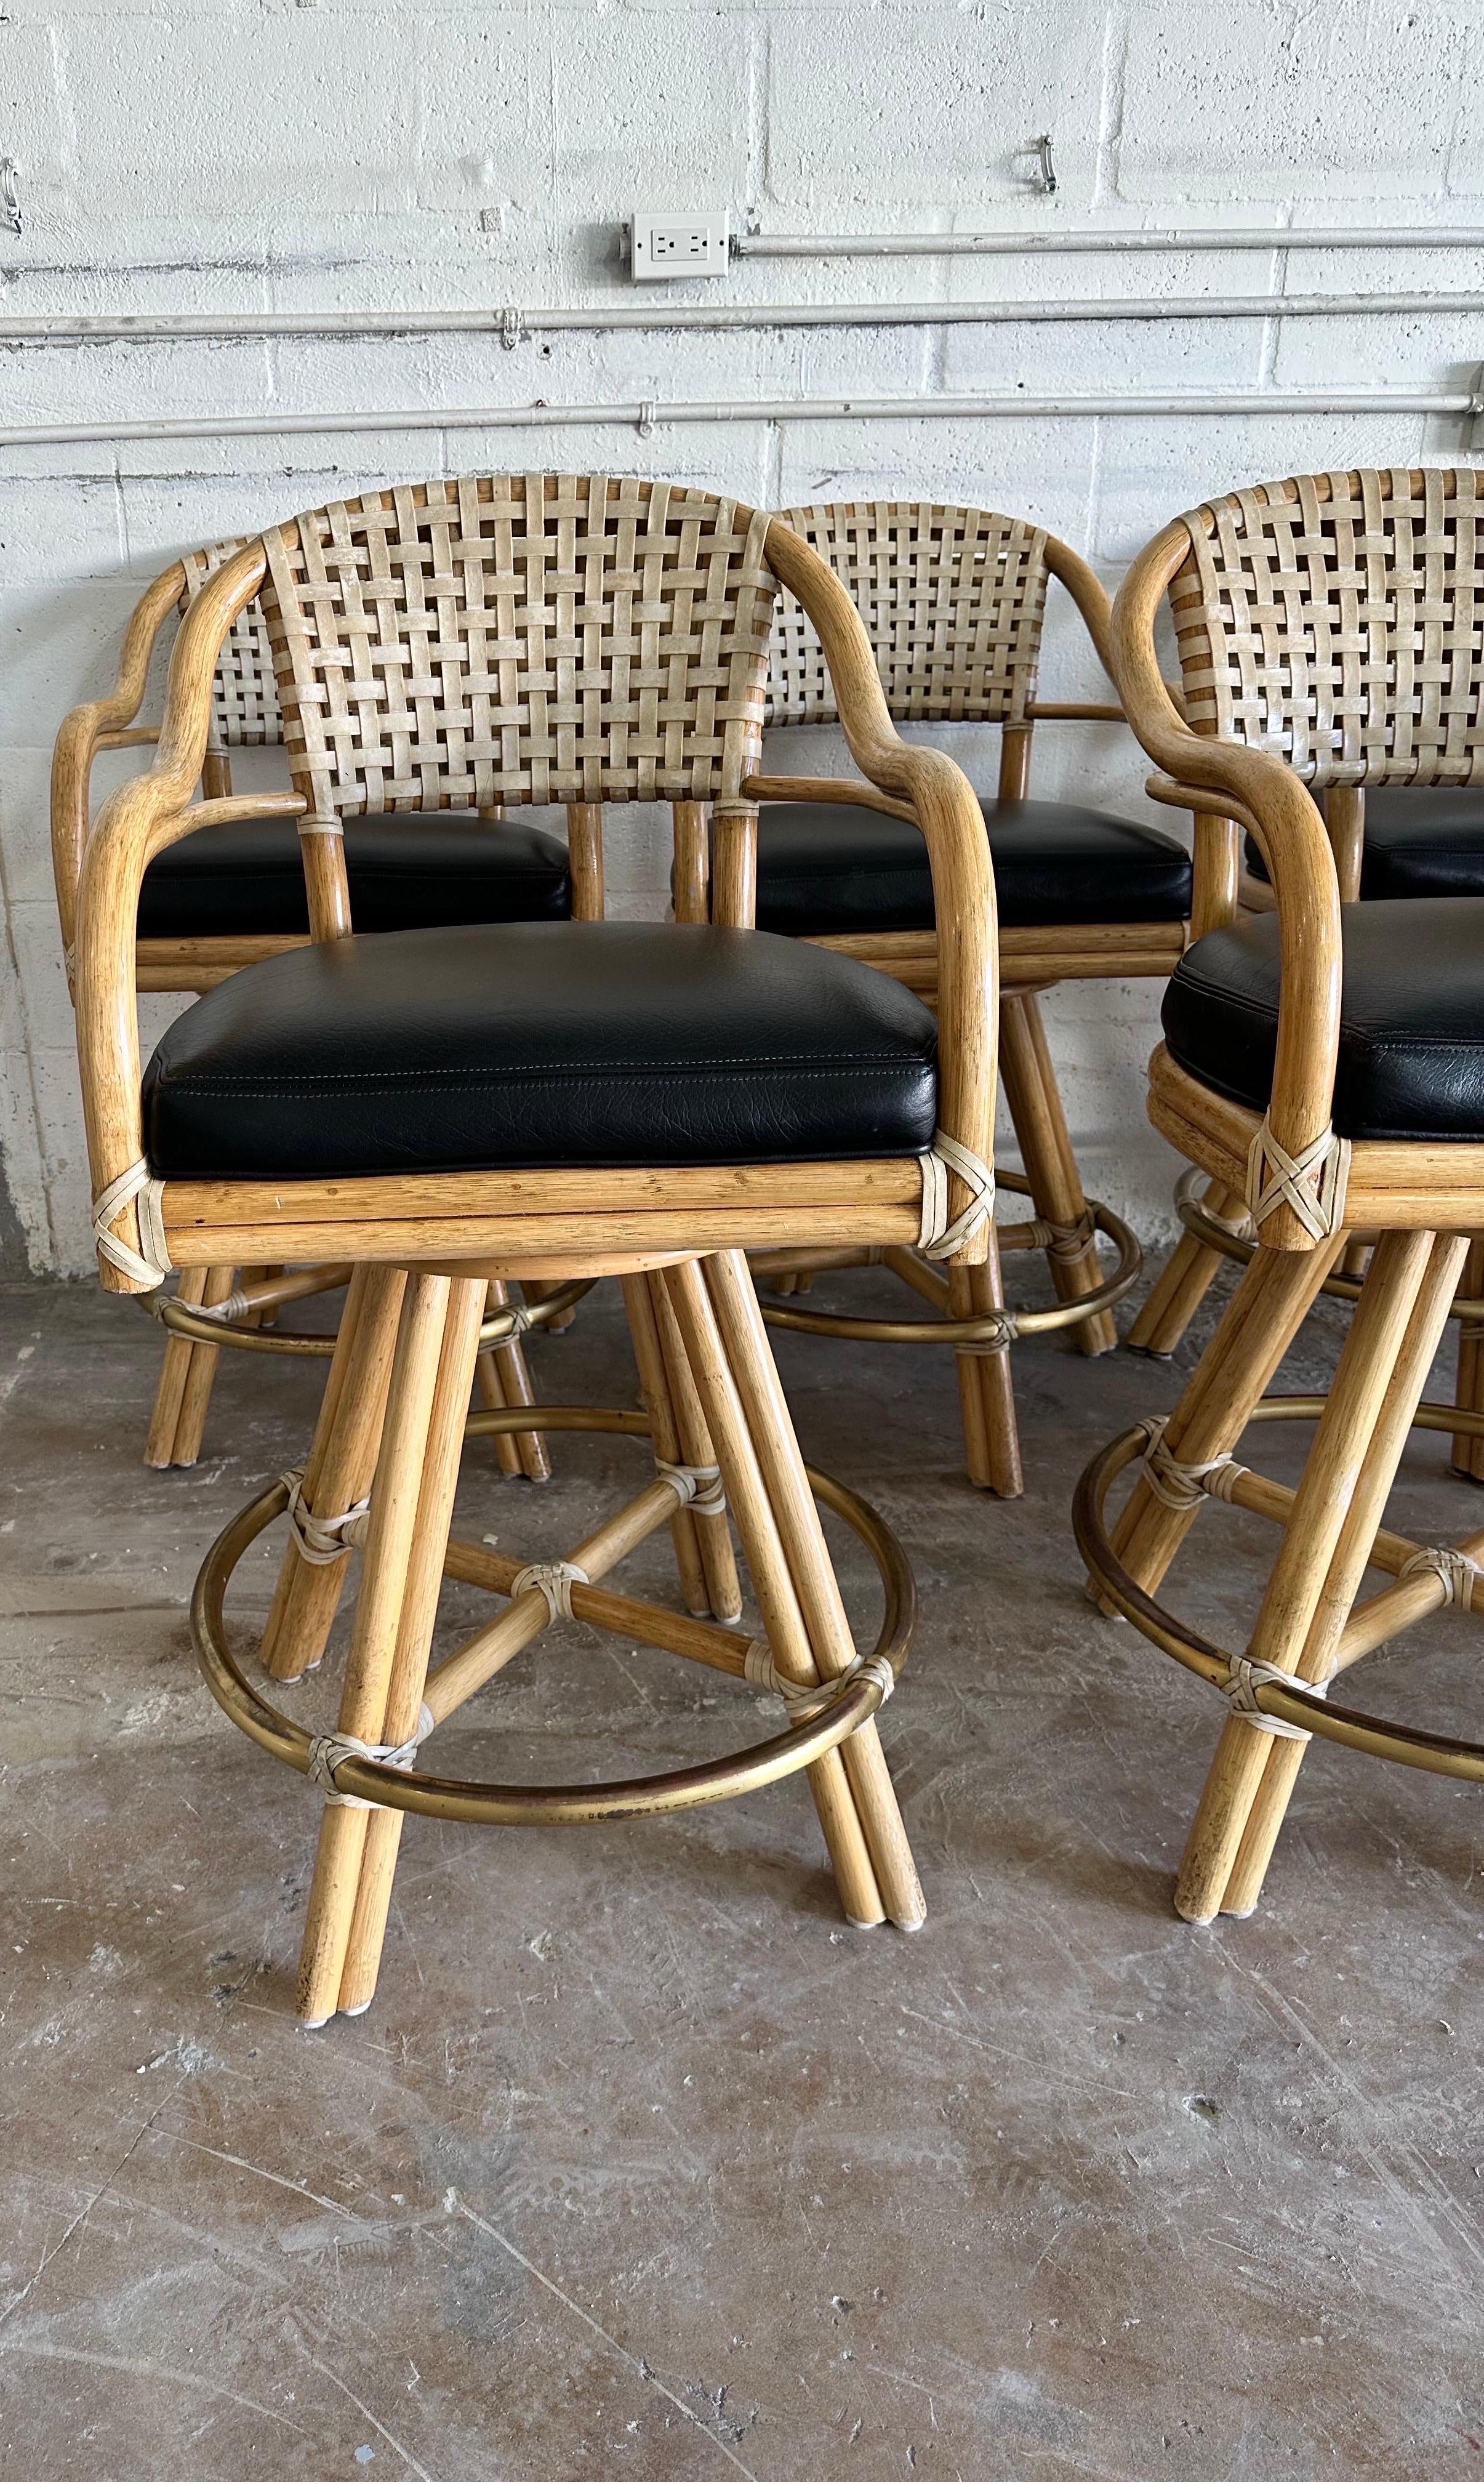 Late 20th Century Set of Eight McGuire Swivel Rattan Bar Stools For Sale